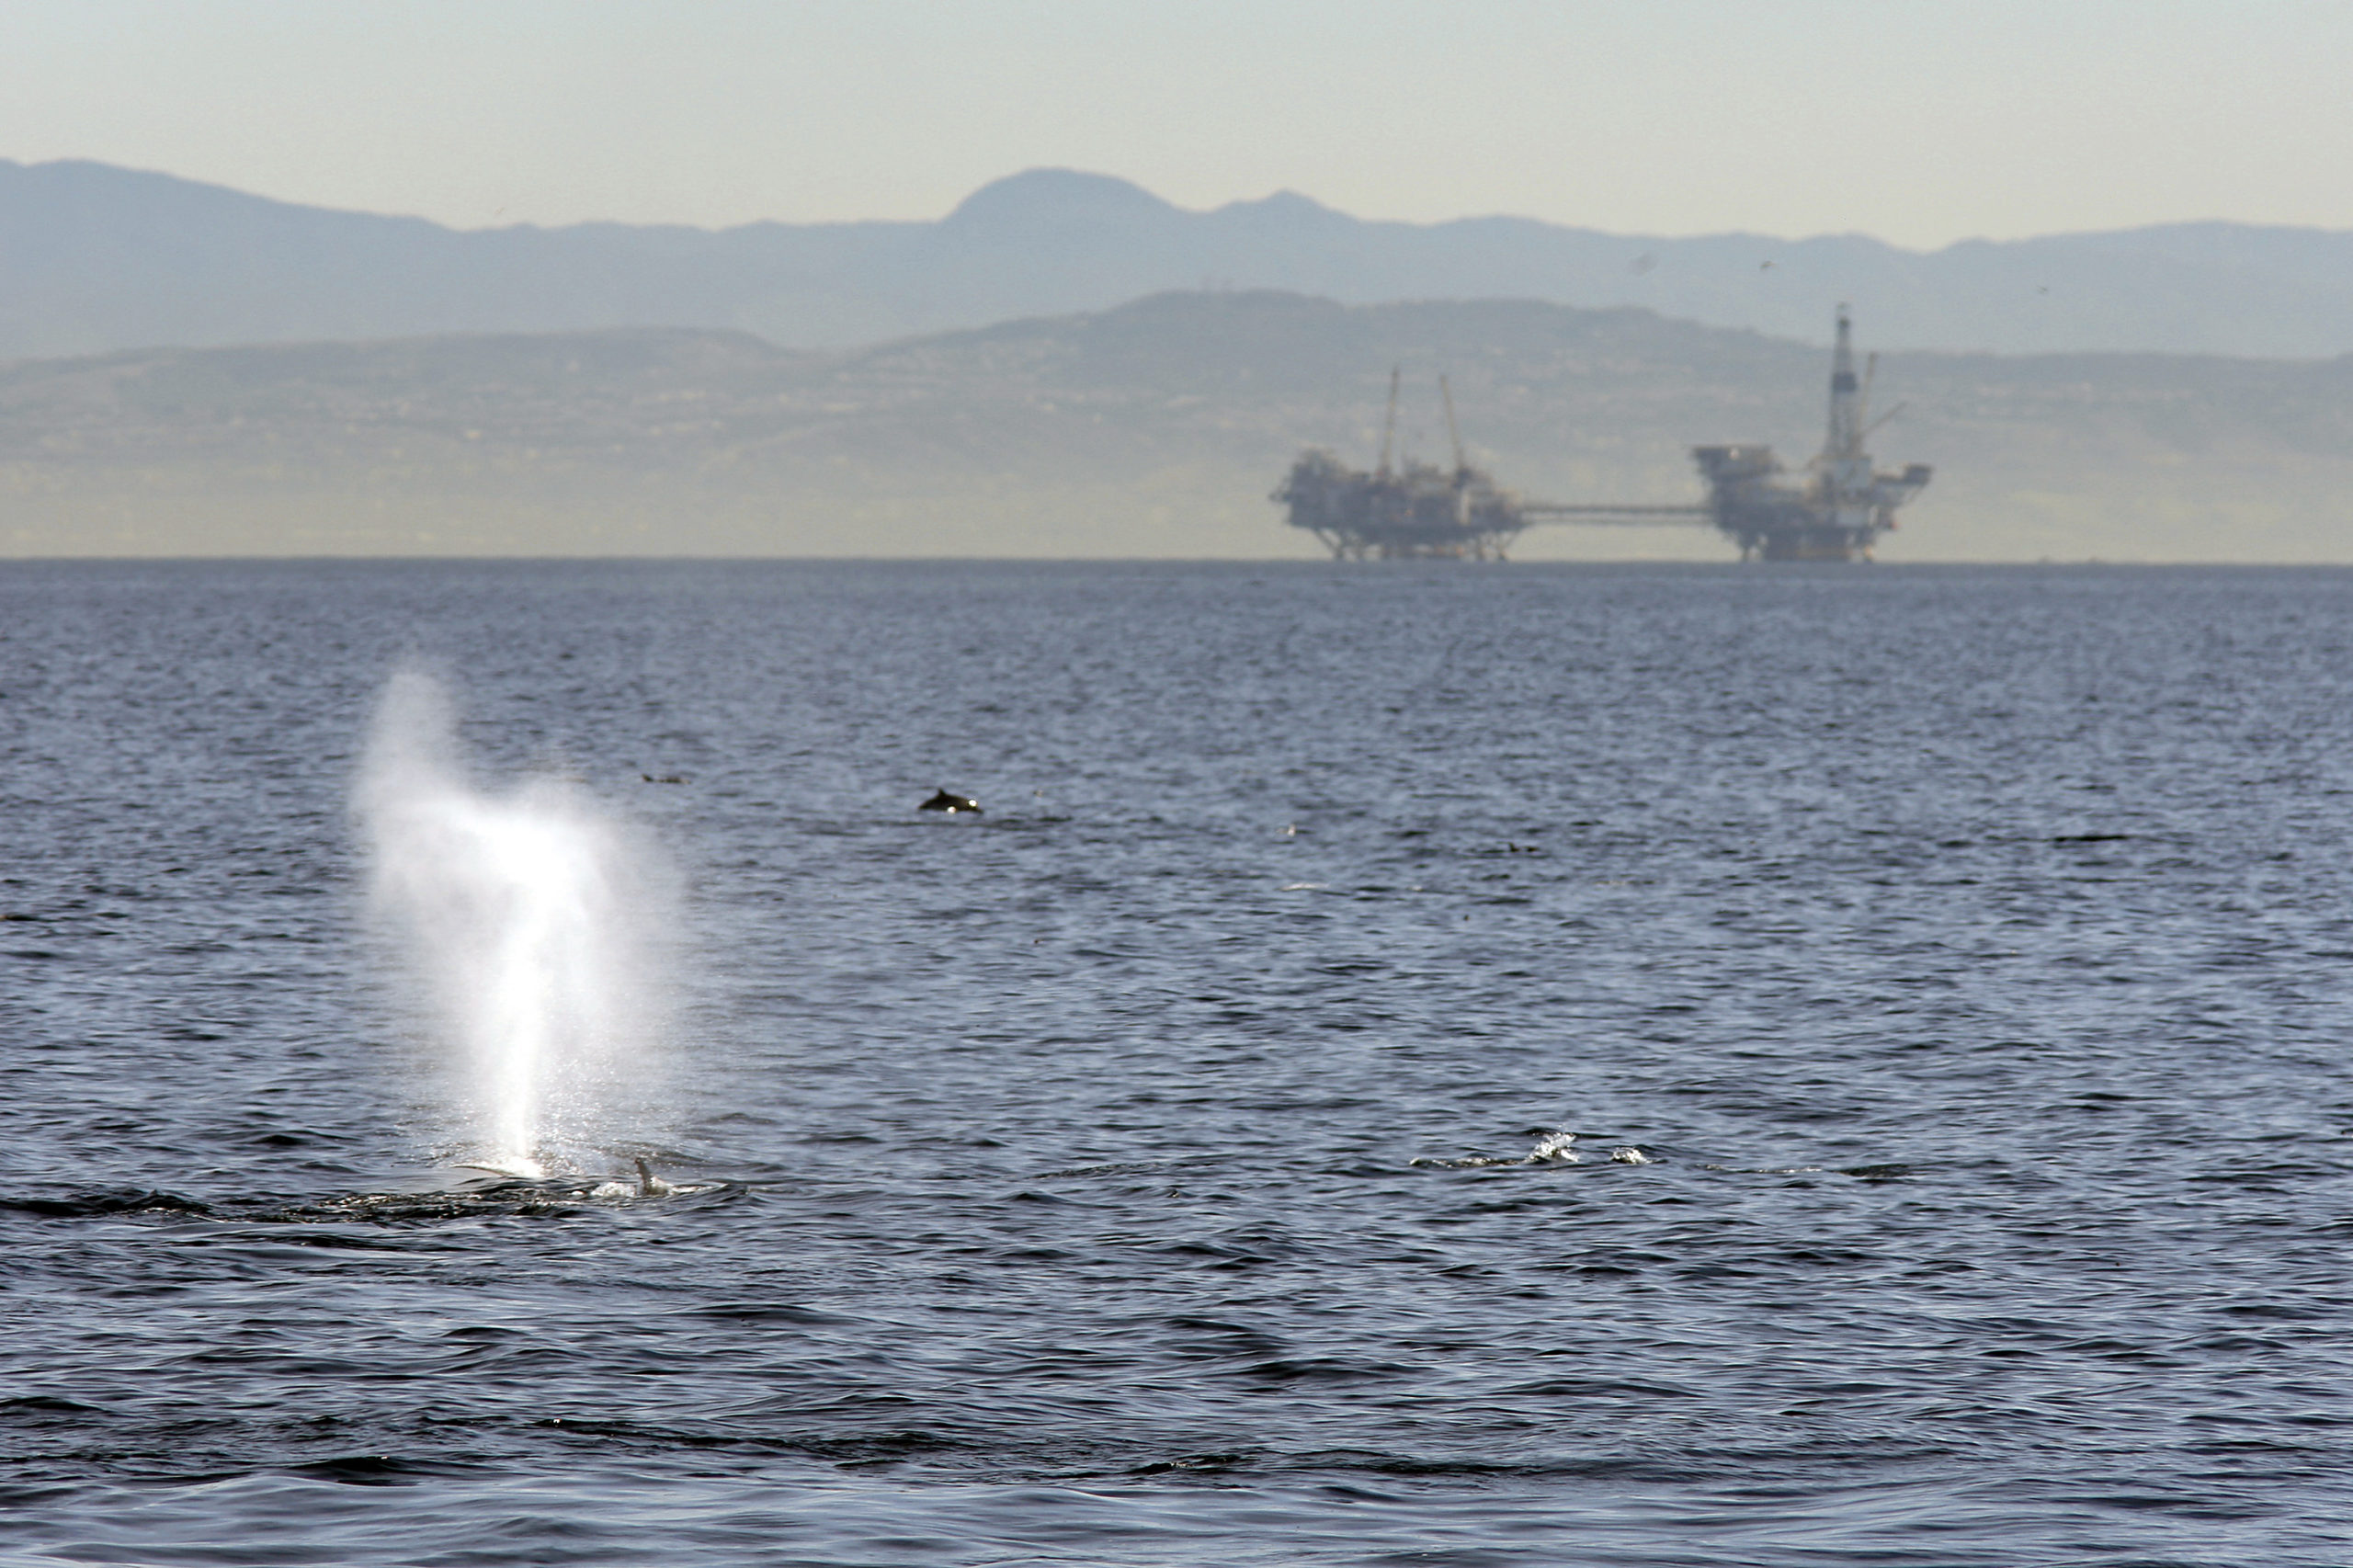 A whale surfaces near offshore oil rigs off the southern California coast. (David McNew/Getty Images)